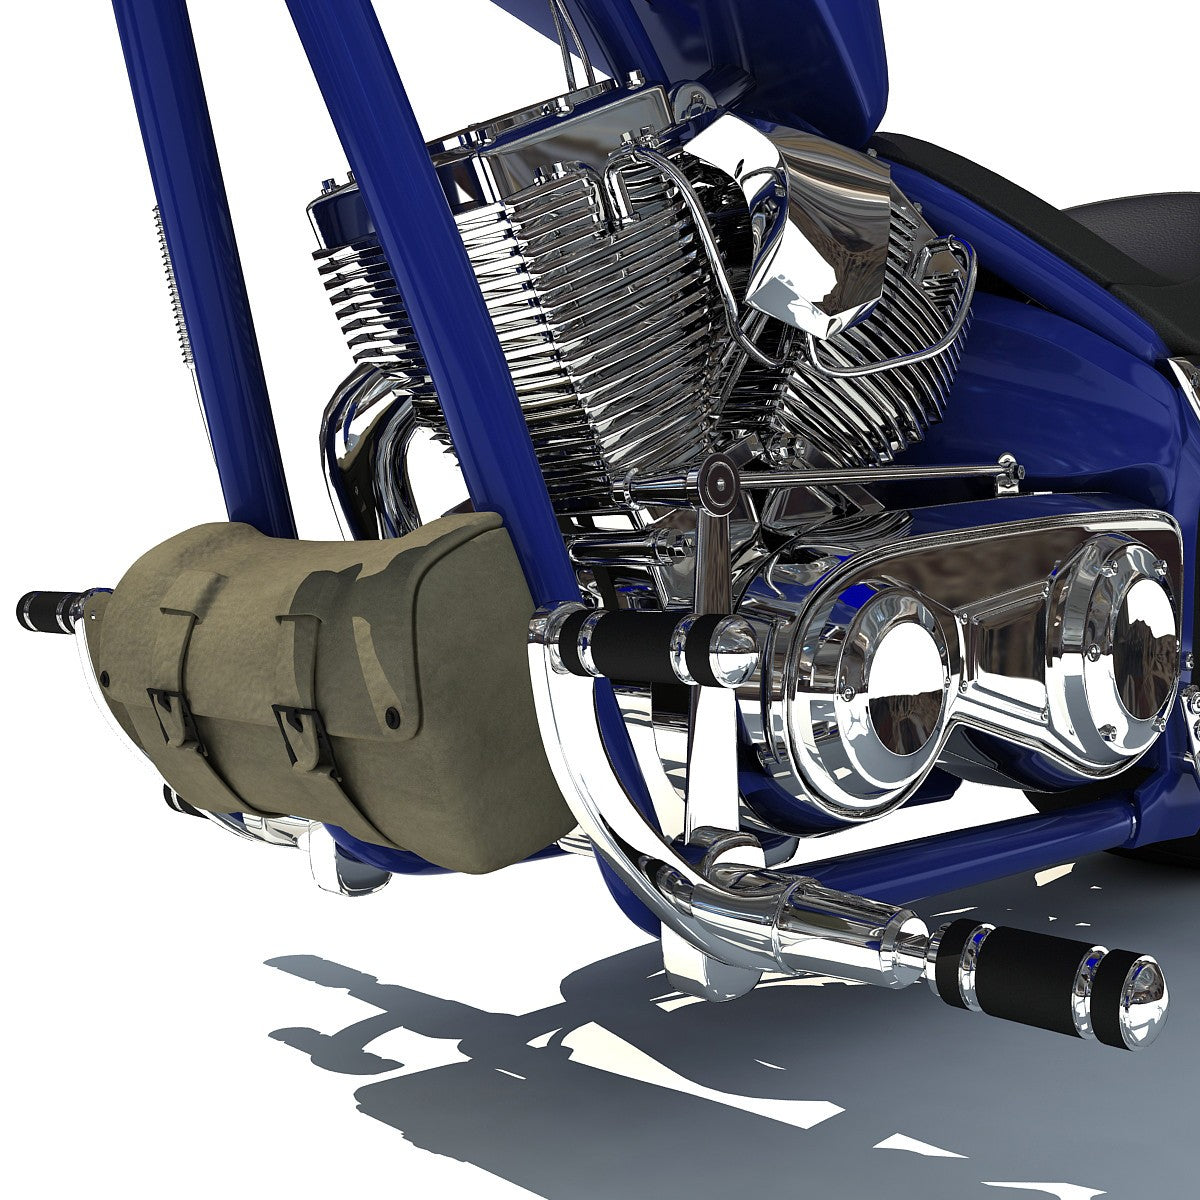 3D Motorcycles and Bikes Models